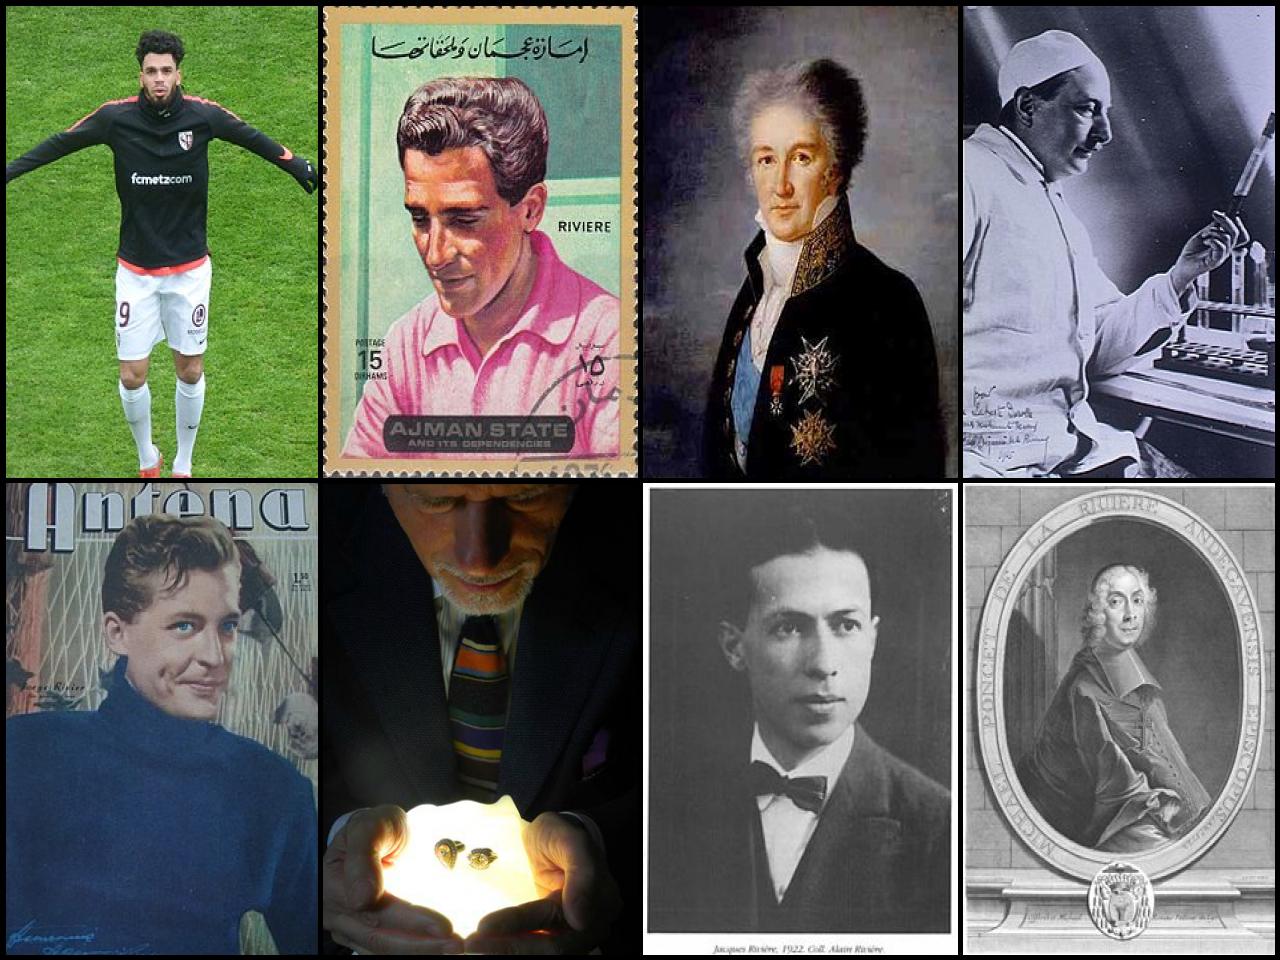 Famous People with surname Riviere